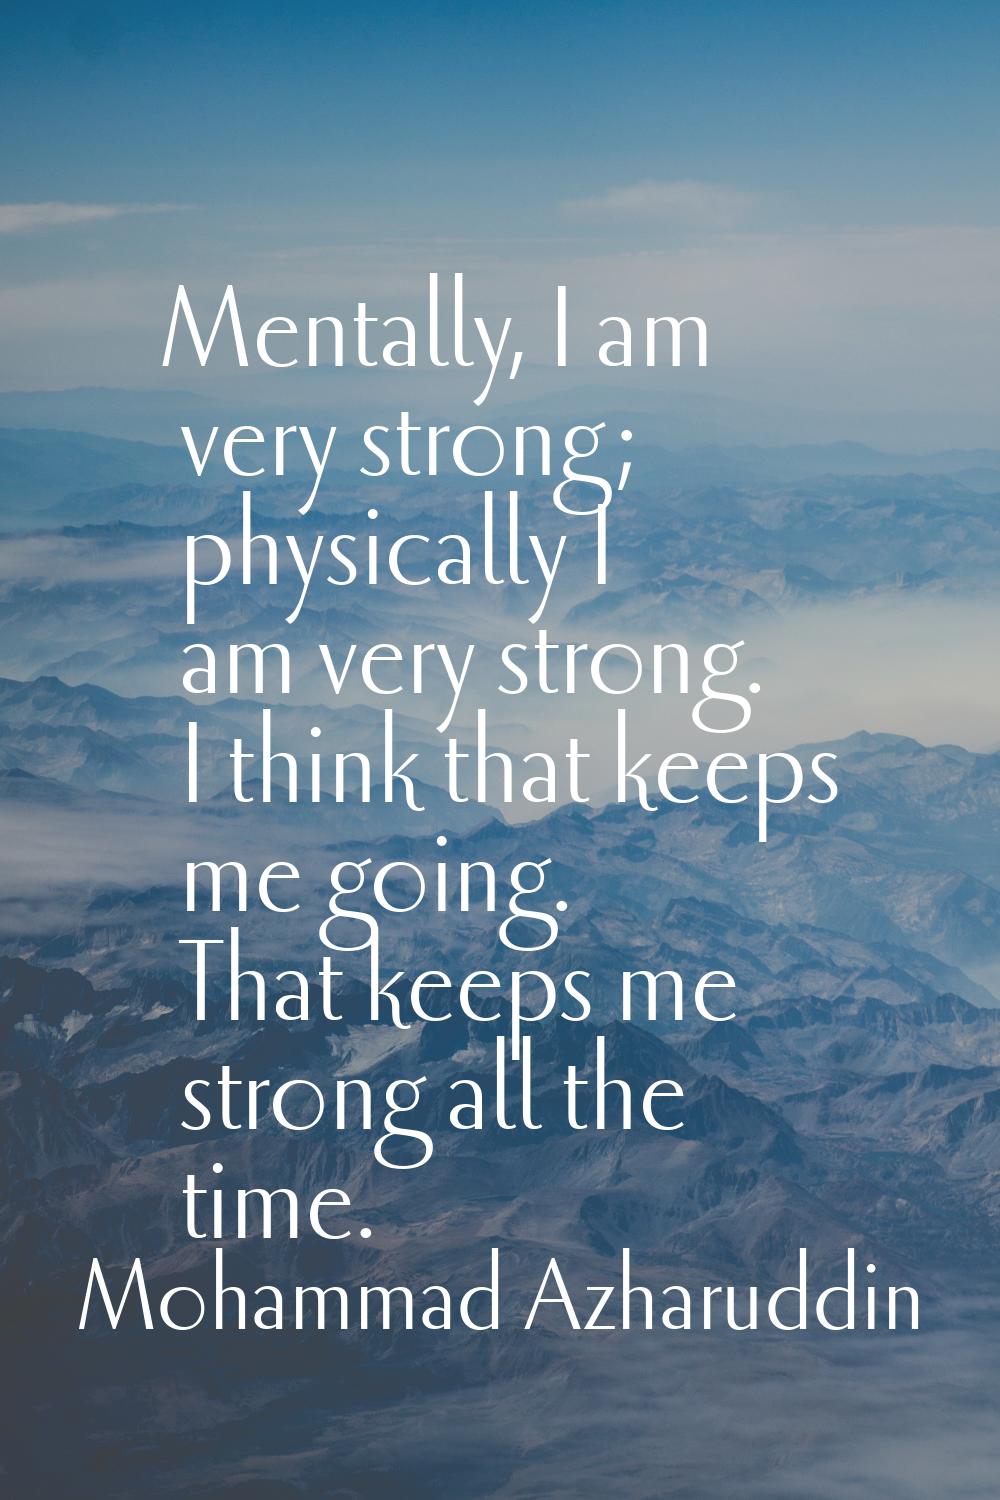 Mentally, I am very strong; physically I am very strong. I think that keeps me going. That keeps me